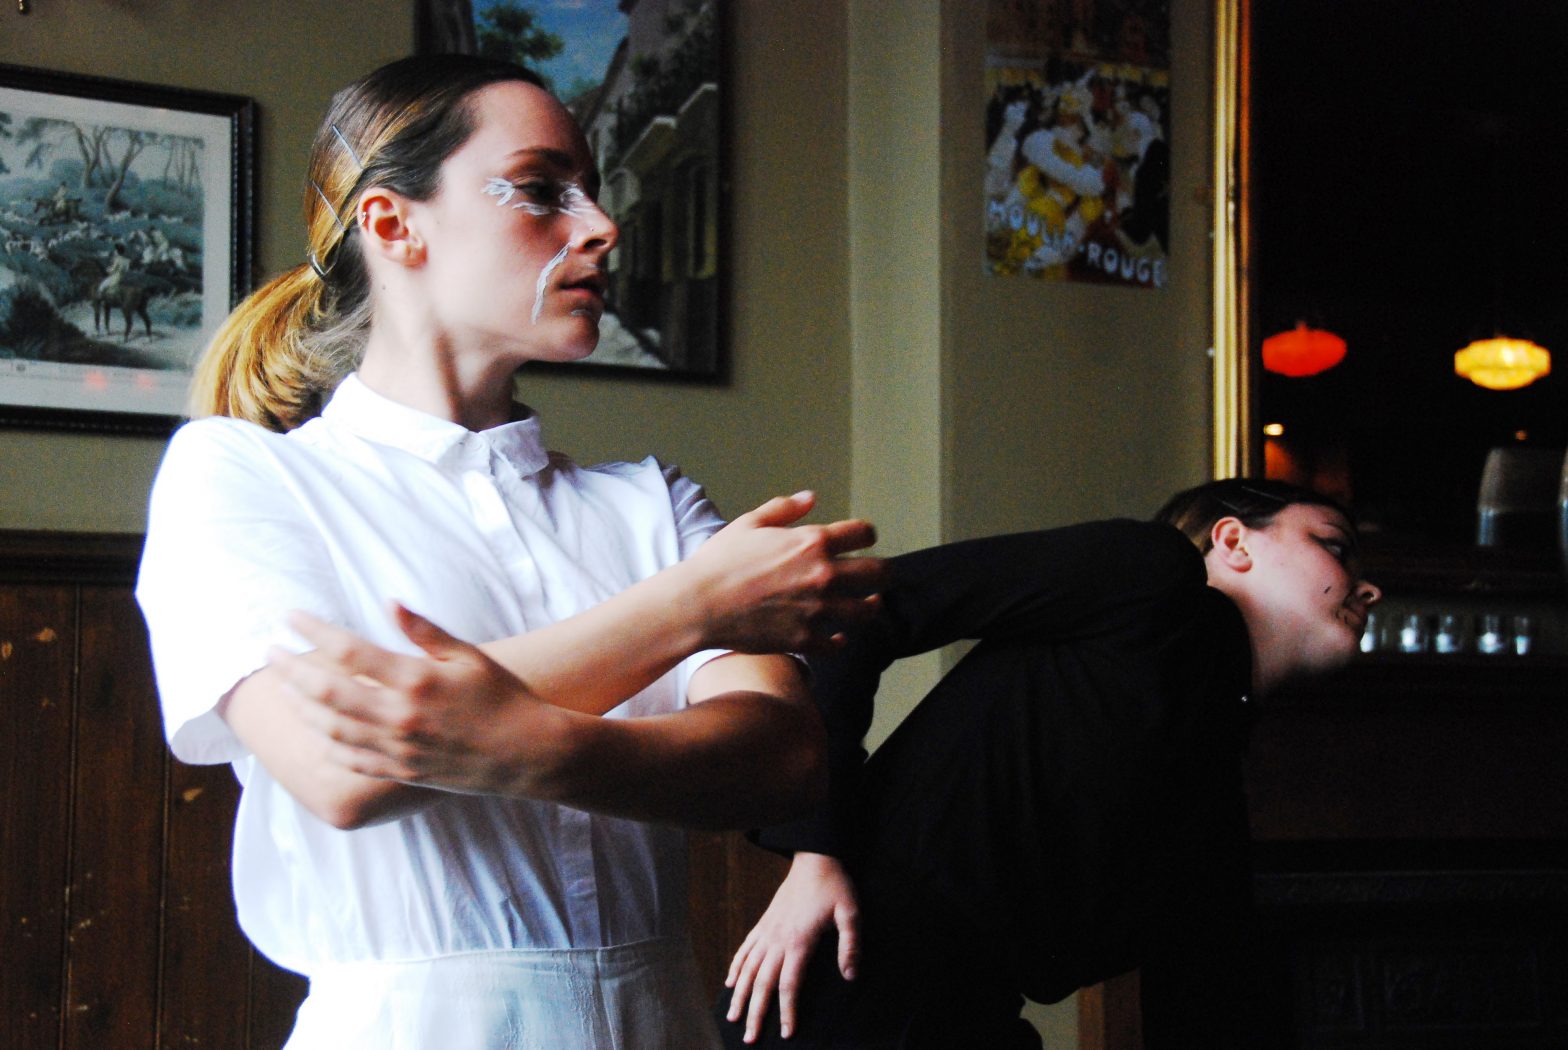 Two women are dancing in a pub function room. One is wearing white, the other black. One is stood up with her arms crossed, the other leaning to the side.